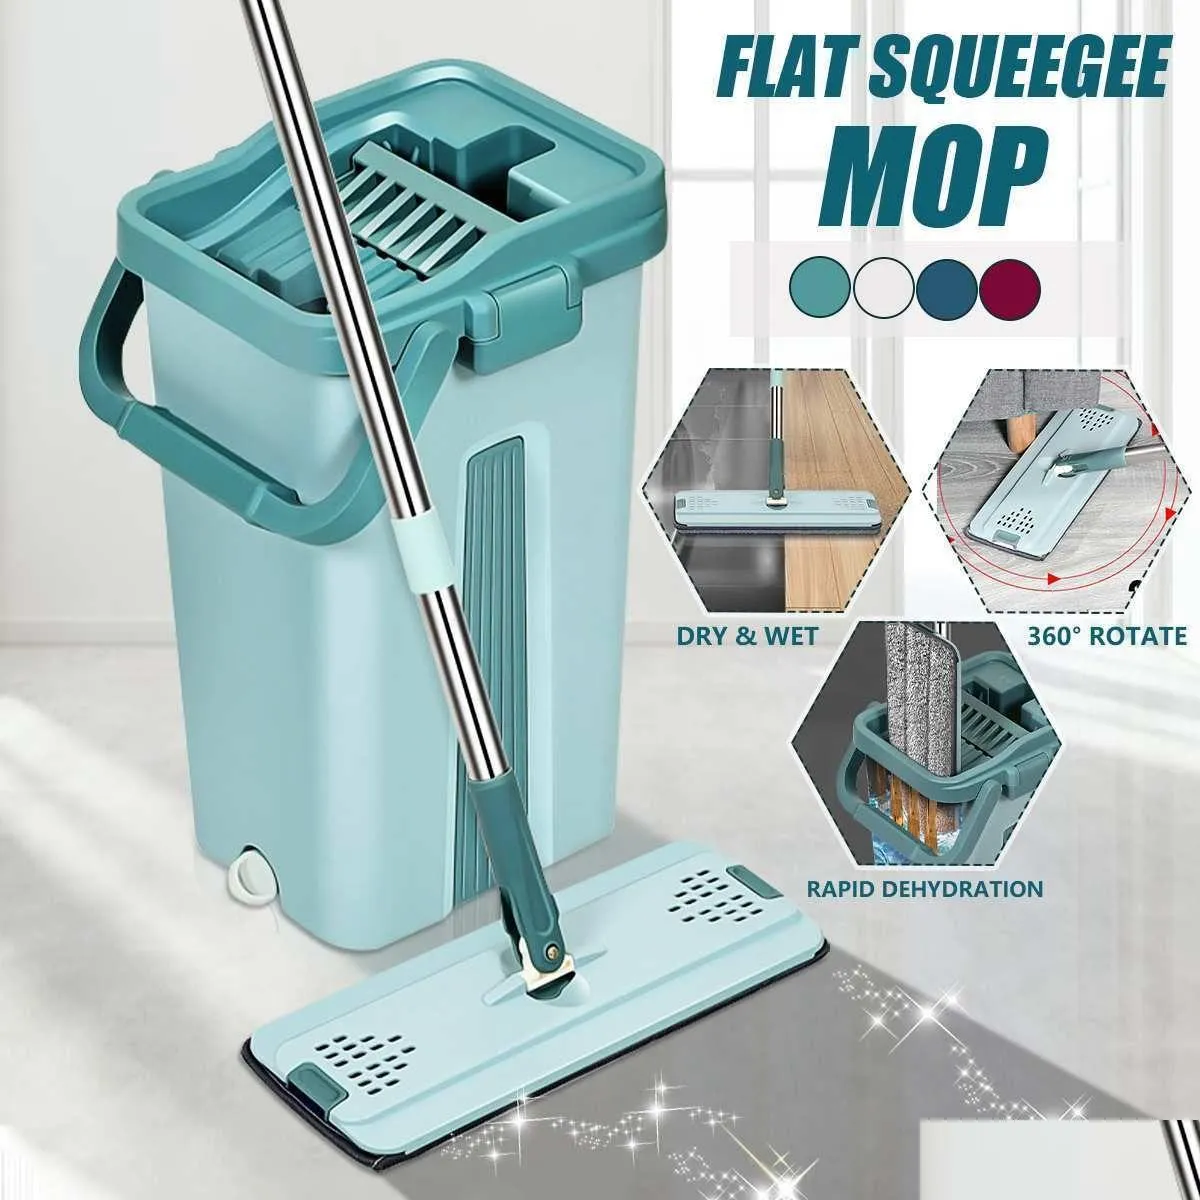 Mops 1Set Flat Squeeze Mop And Bucket Hand Wringing Floor Cleaning 360 Roatation Matic Spin Pads Wet Dry U Lj201128 Drop Delivery Home Dhi98